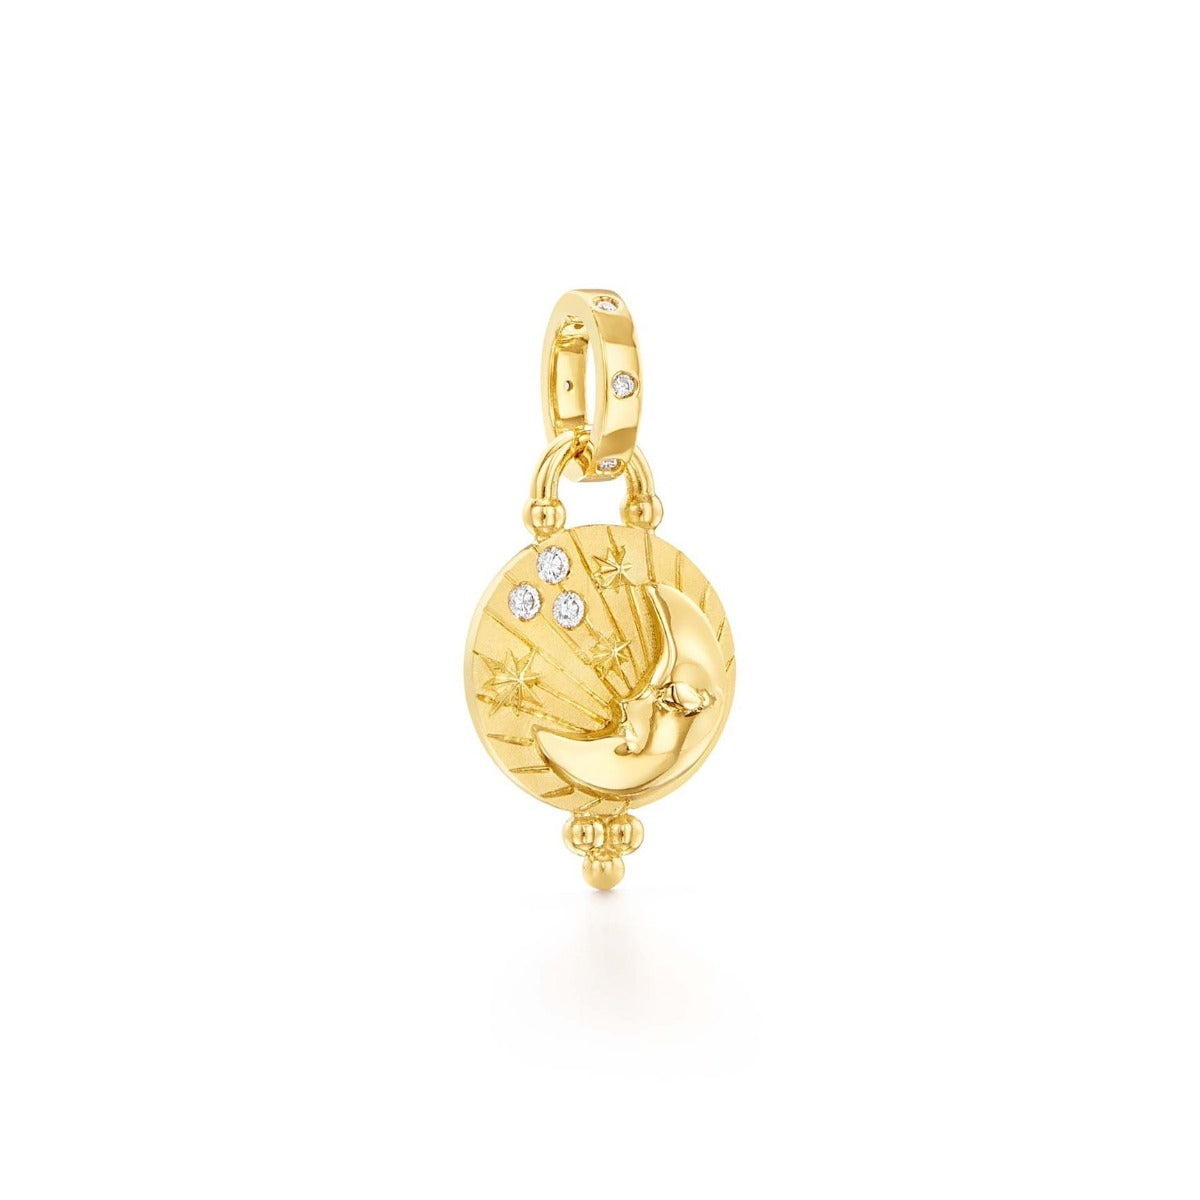 Temple St. Clair Luna Pendant channels the pure magic of moonlight. It features alternating satin and polished finish 18K yellow gold with a glowing trio of diamonds.